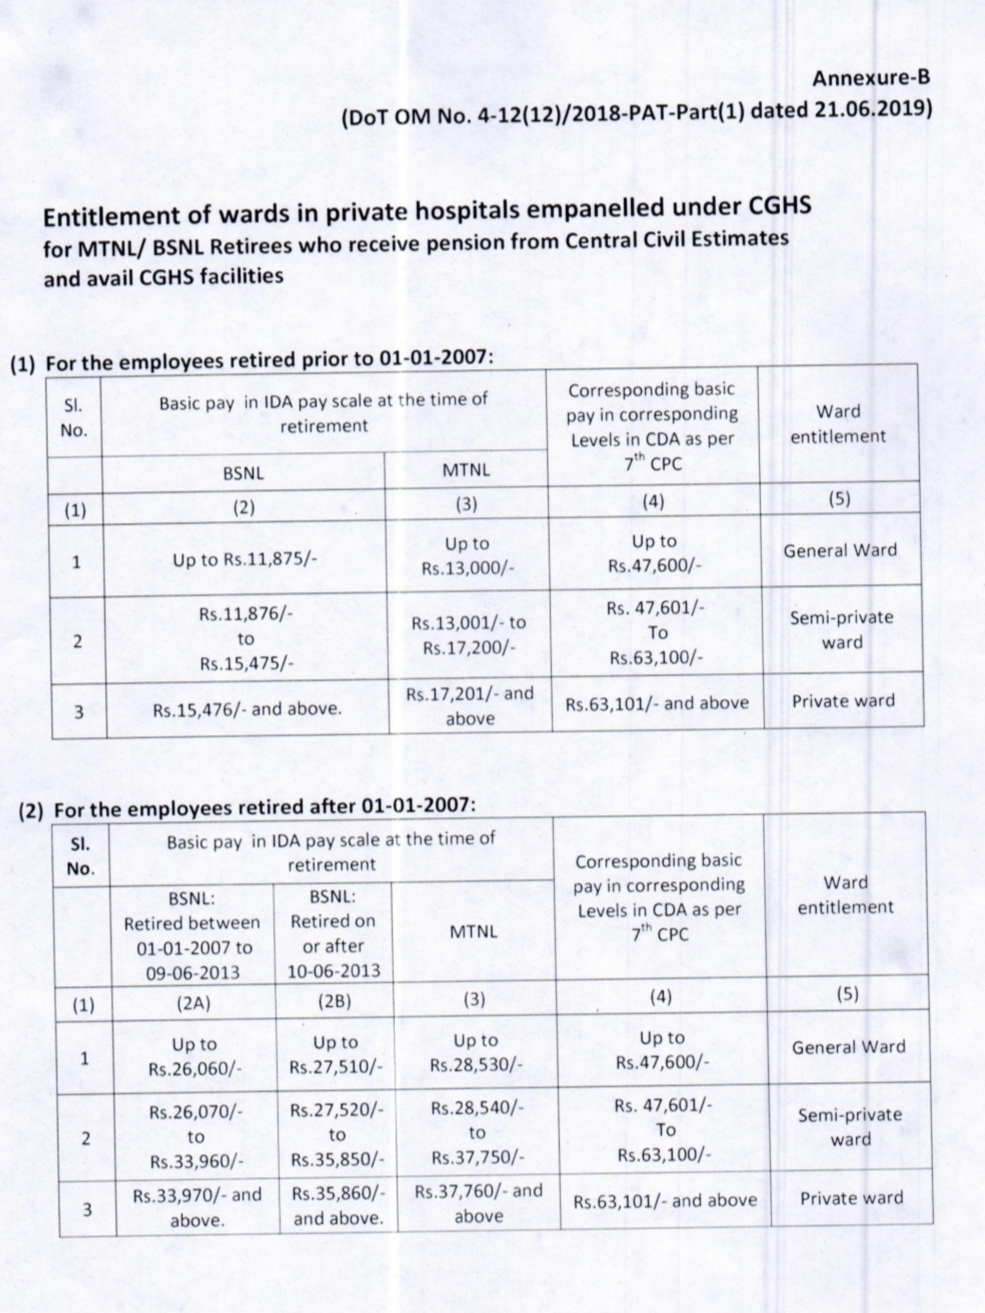 cghs-facilities-to-the-retired-bsnl-mtnl-employees-who-are-in-receipt